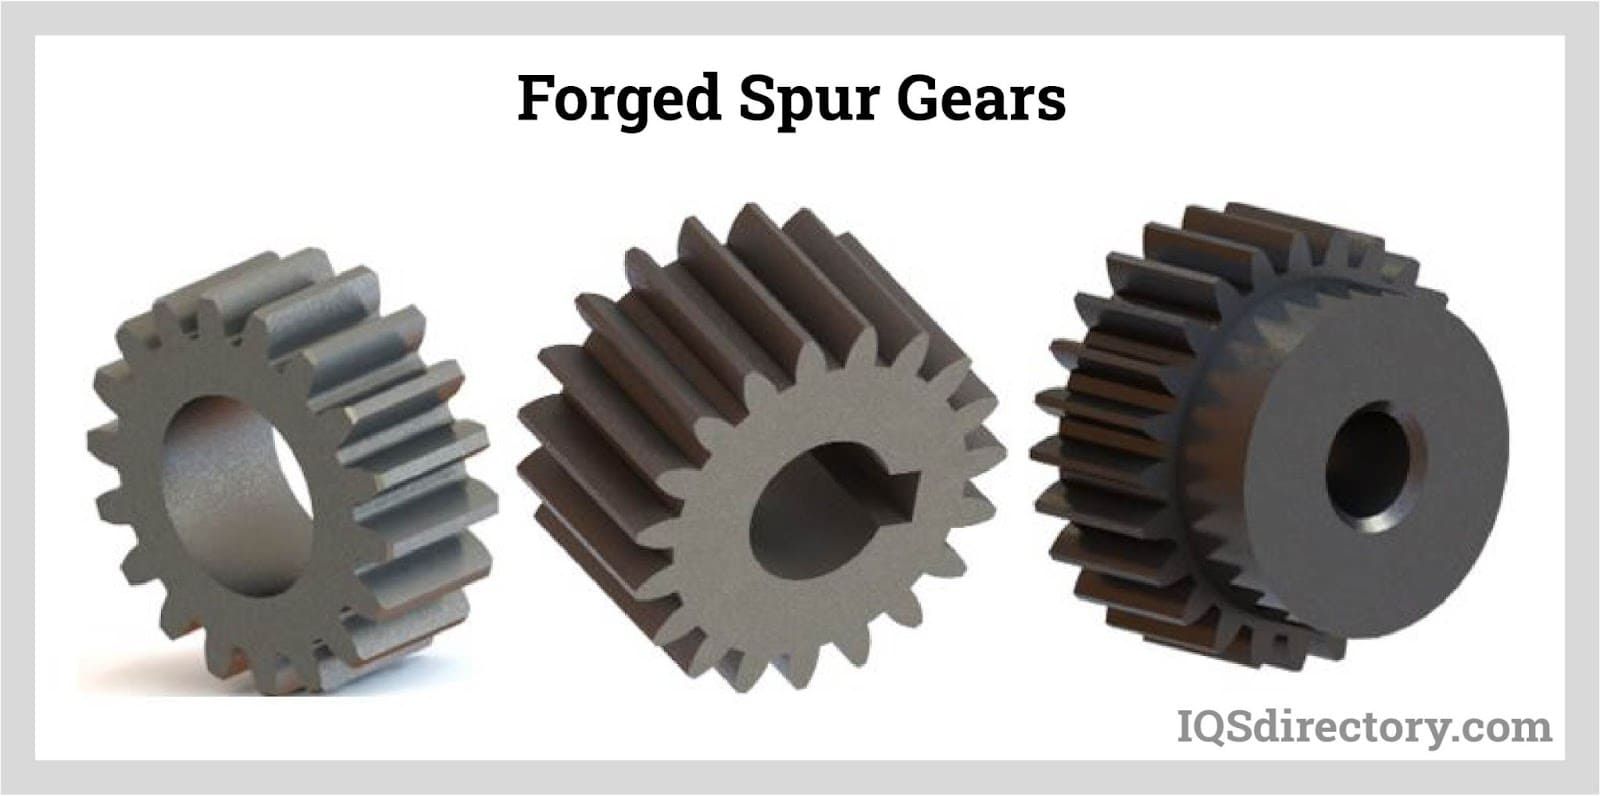 Forged Spur Gears